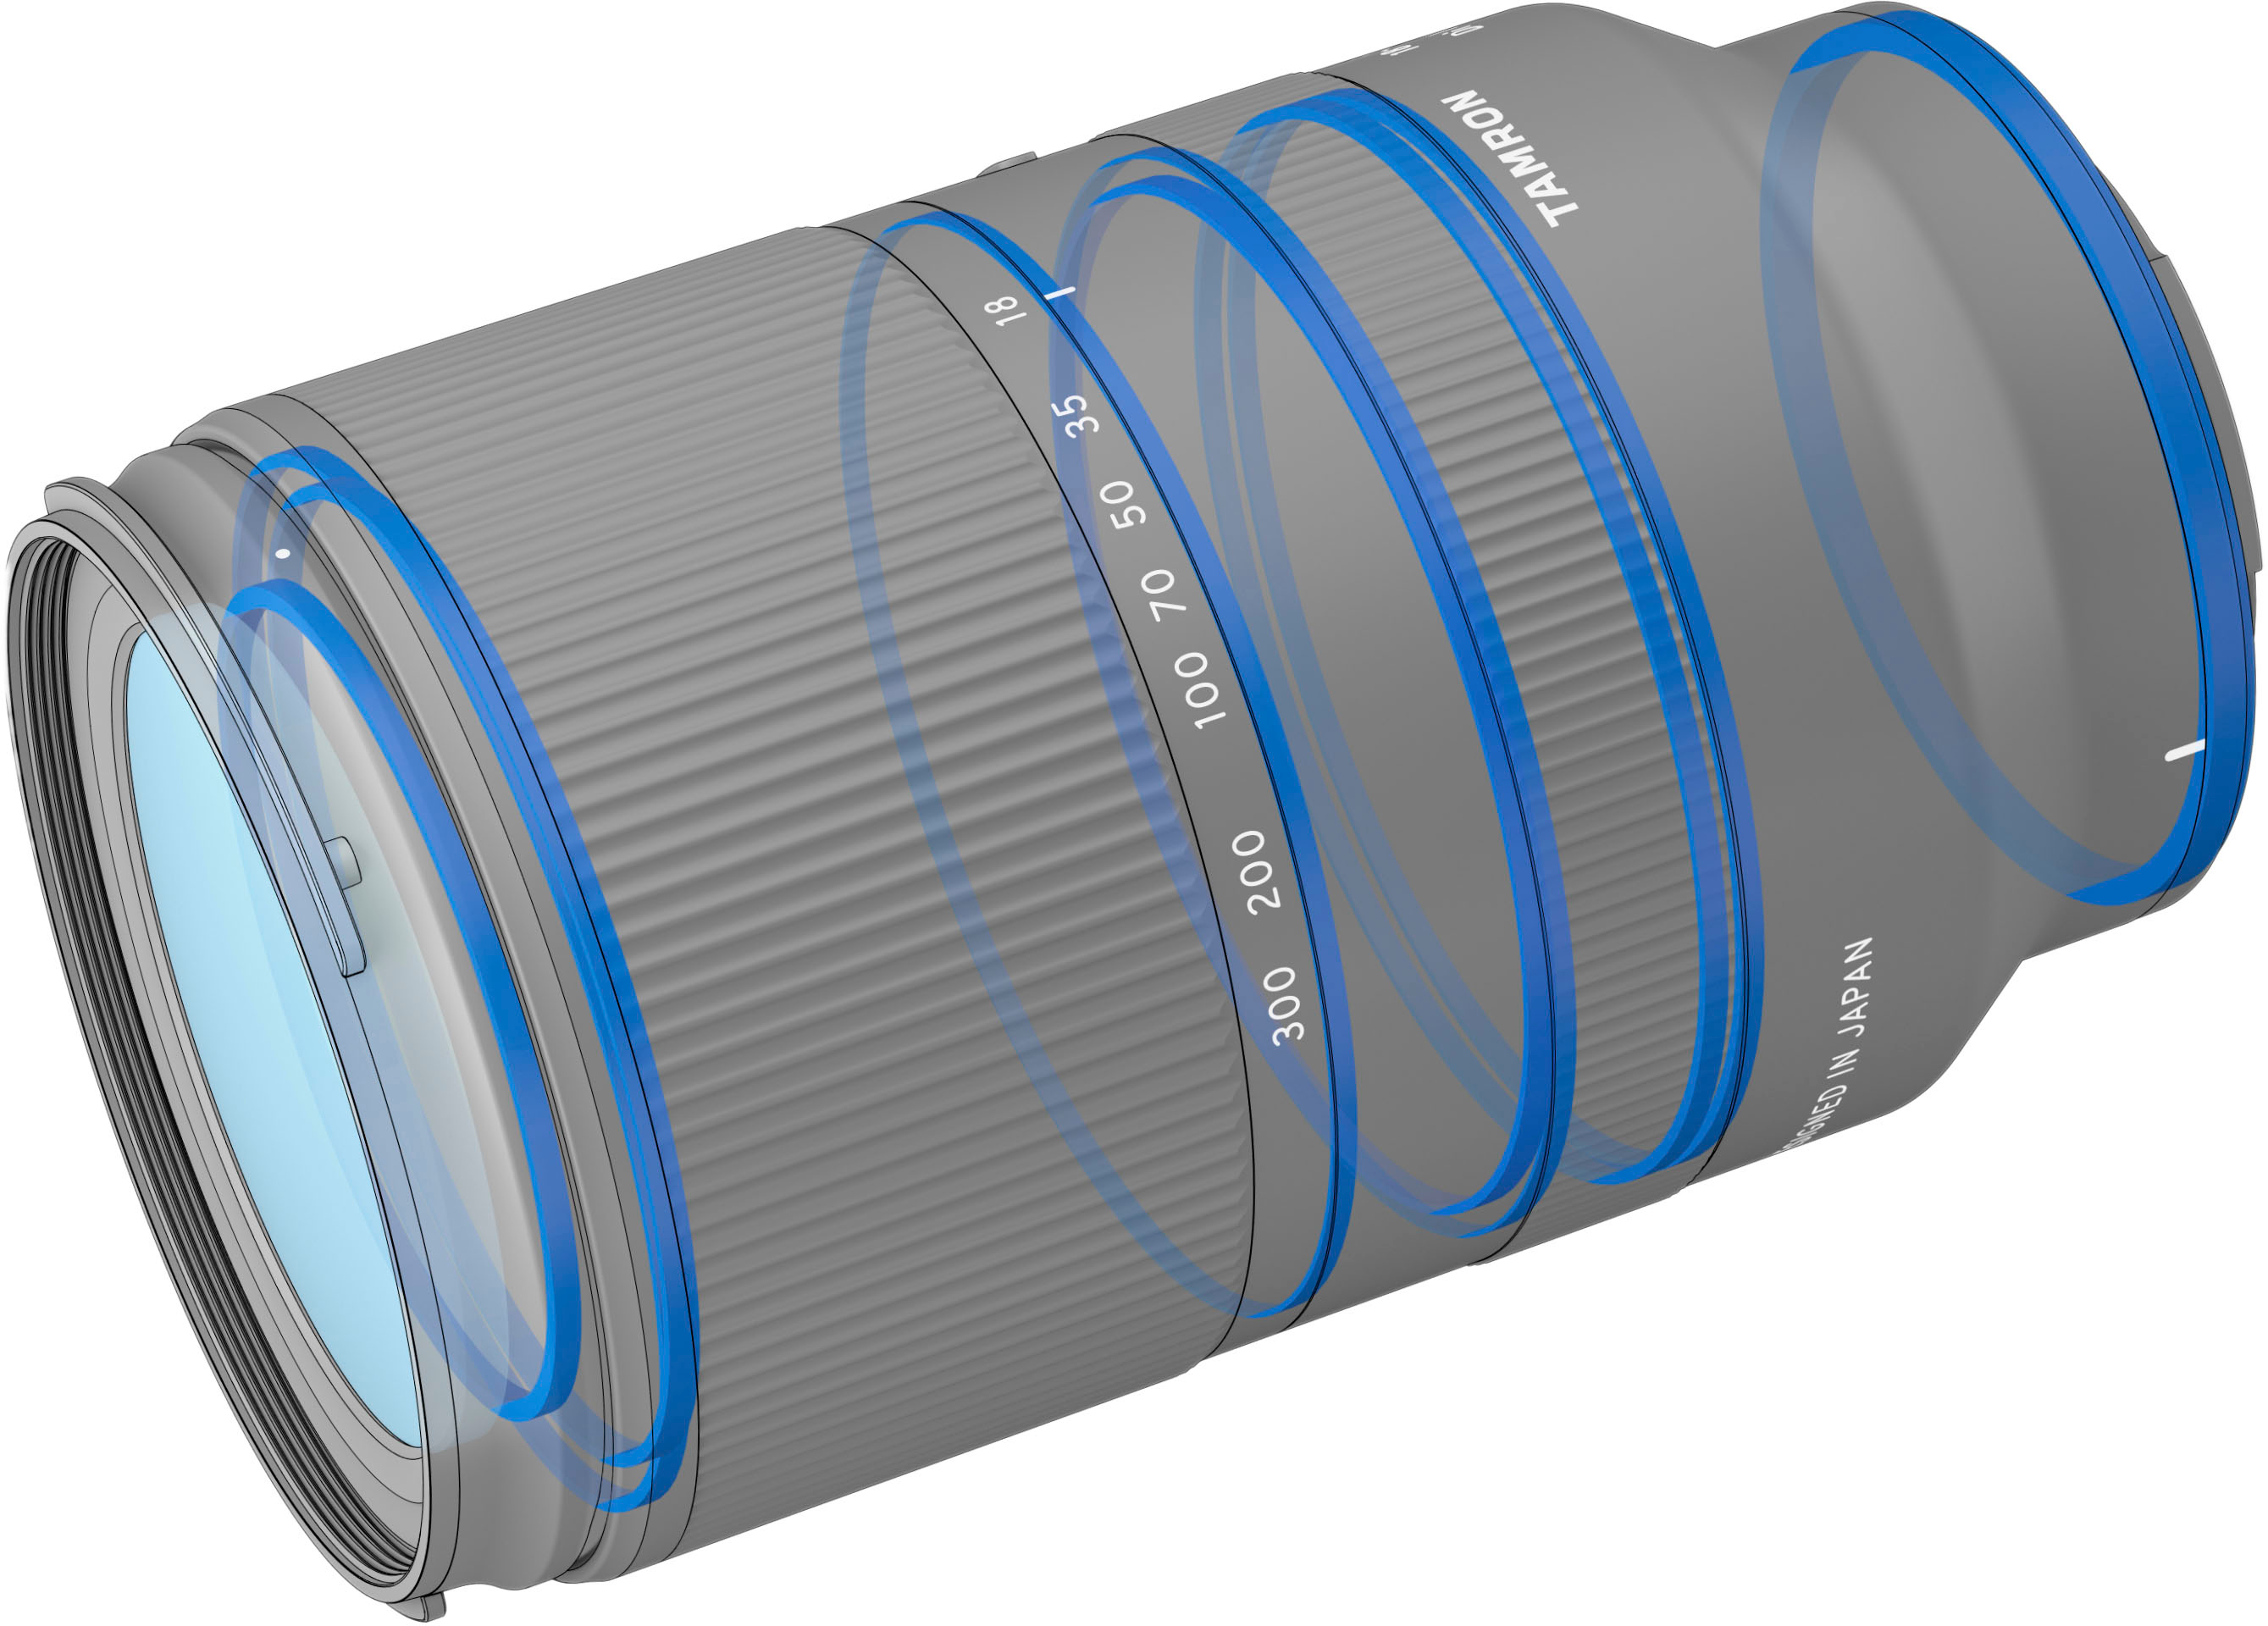 Tamron 18-300mm f/3.5-6.3 Di III-A VC VXD All-In-One Zoom Lens for